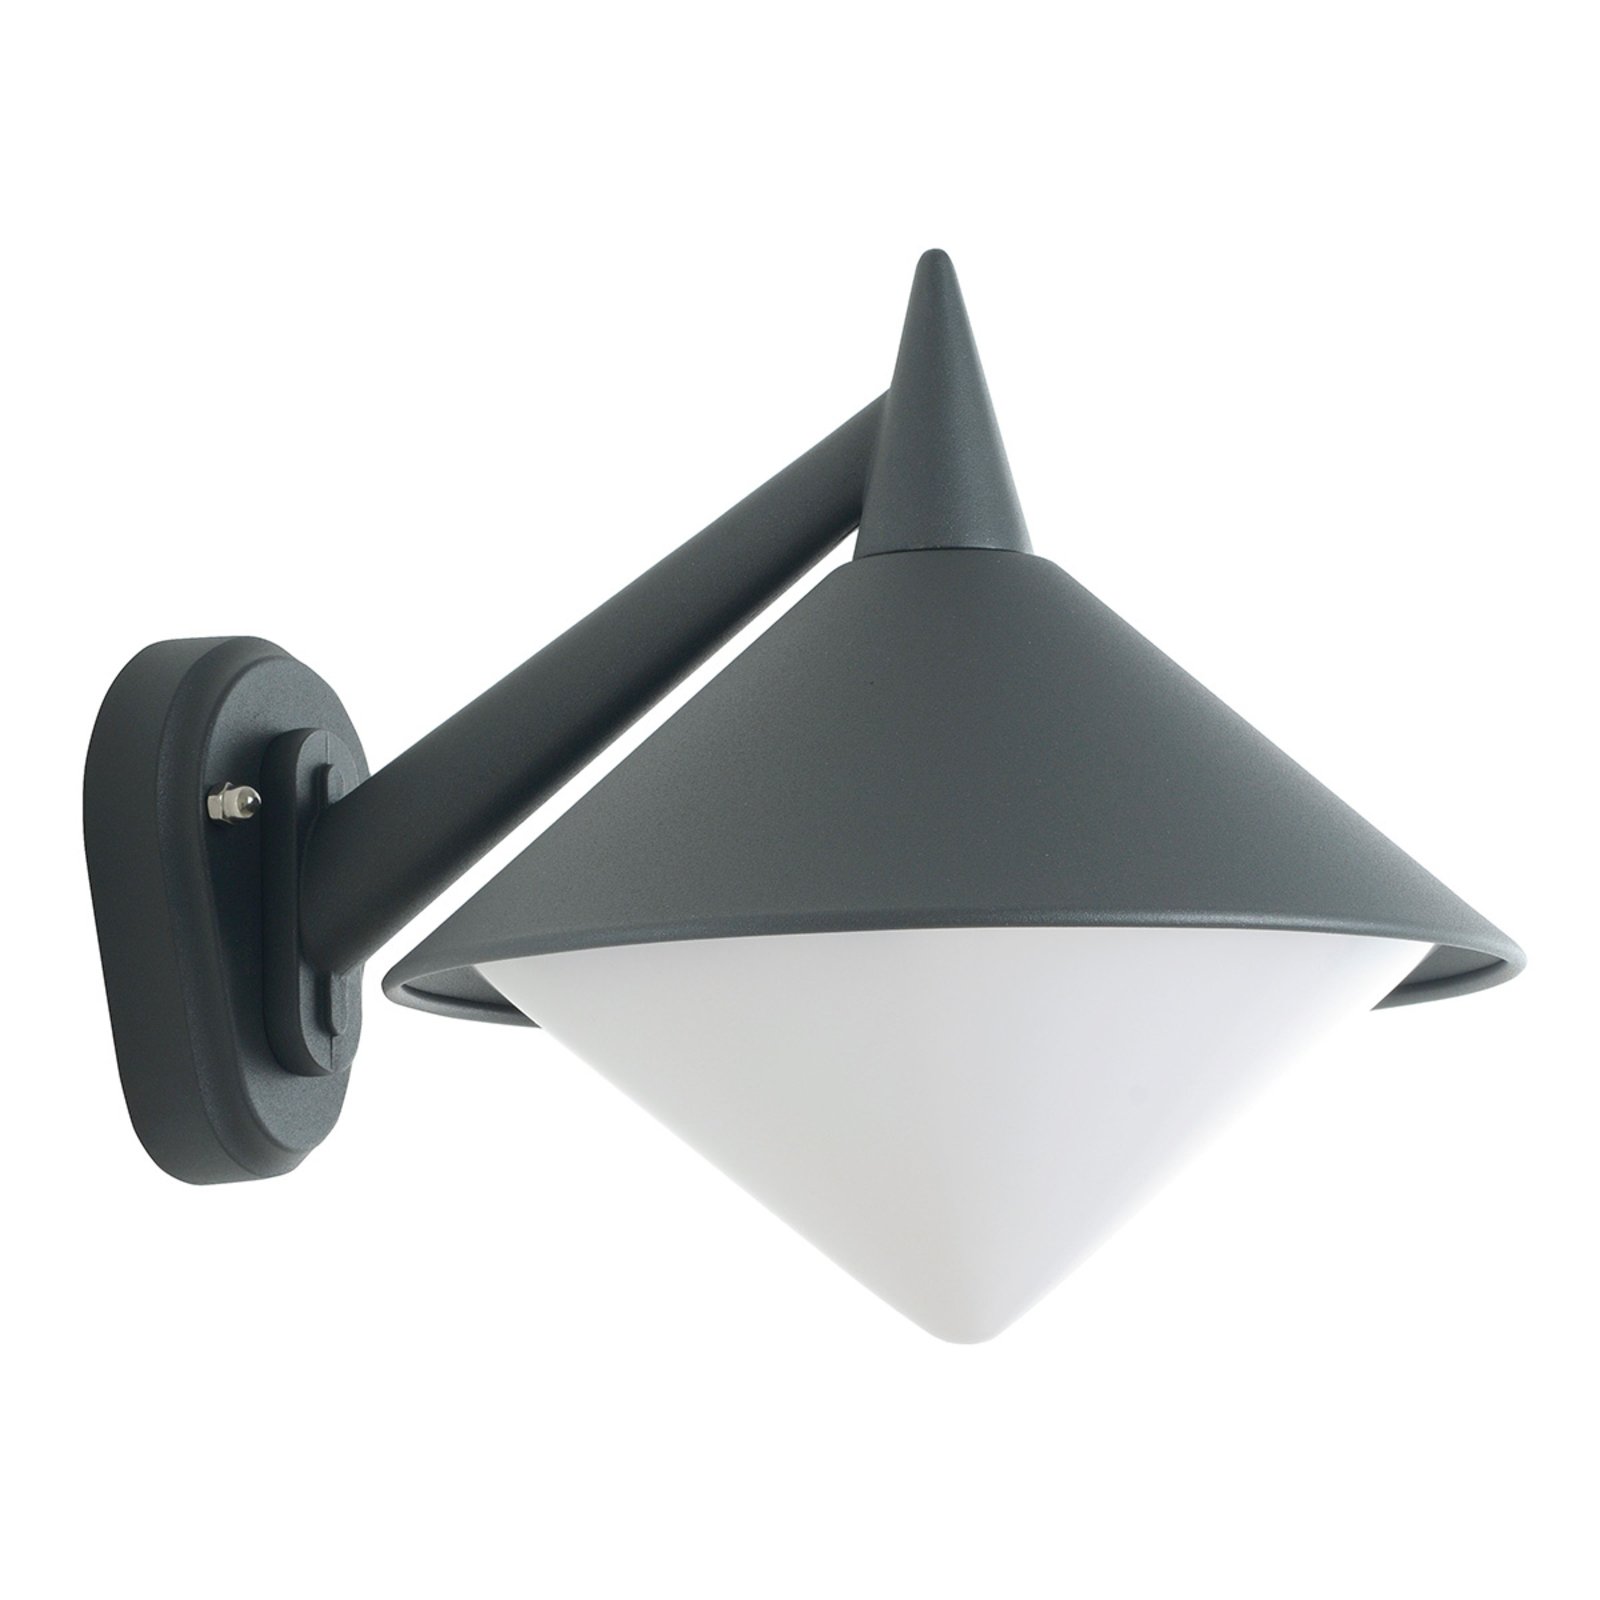 Seawater resistant outdoor wall light Liara, graphite